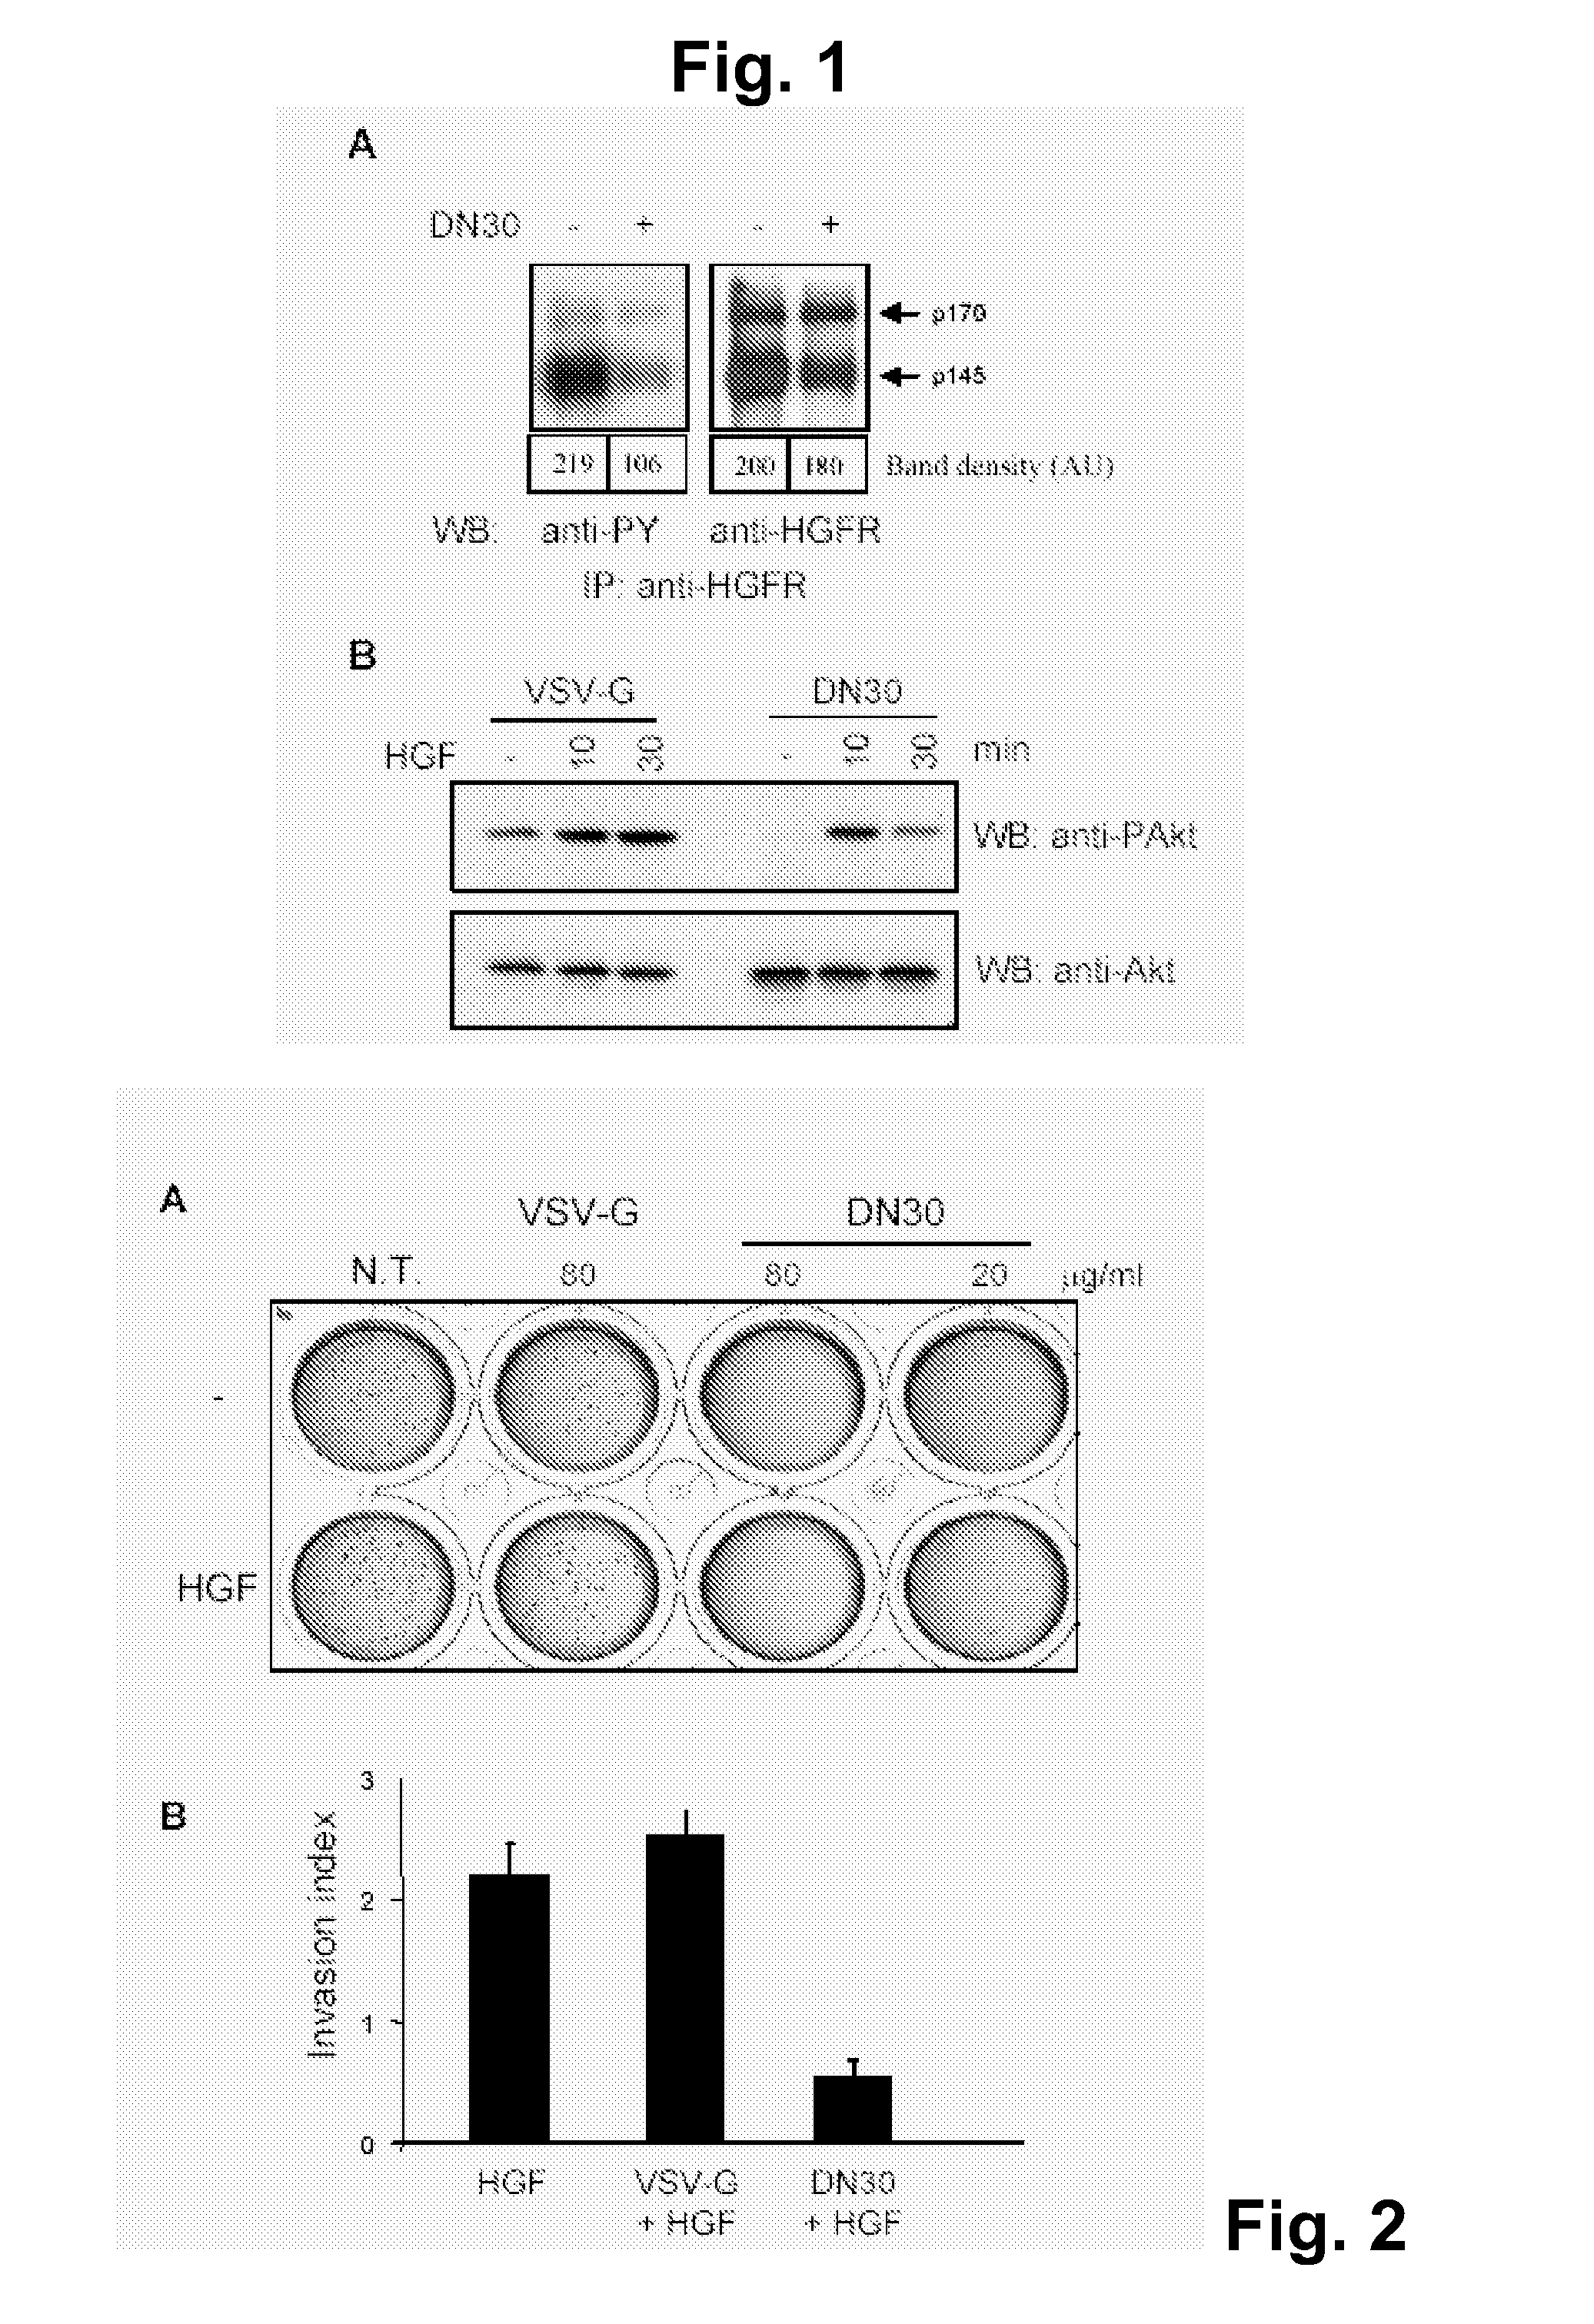 Anti-Met Monoclonal Antibody, Fragments and Vectors Thereof, for the Treatment of Tumors and Corresponding Products